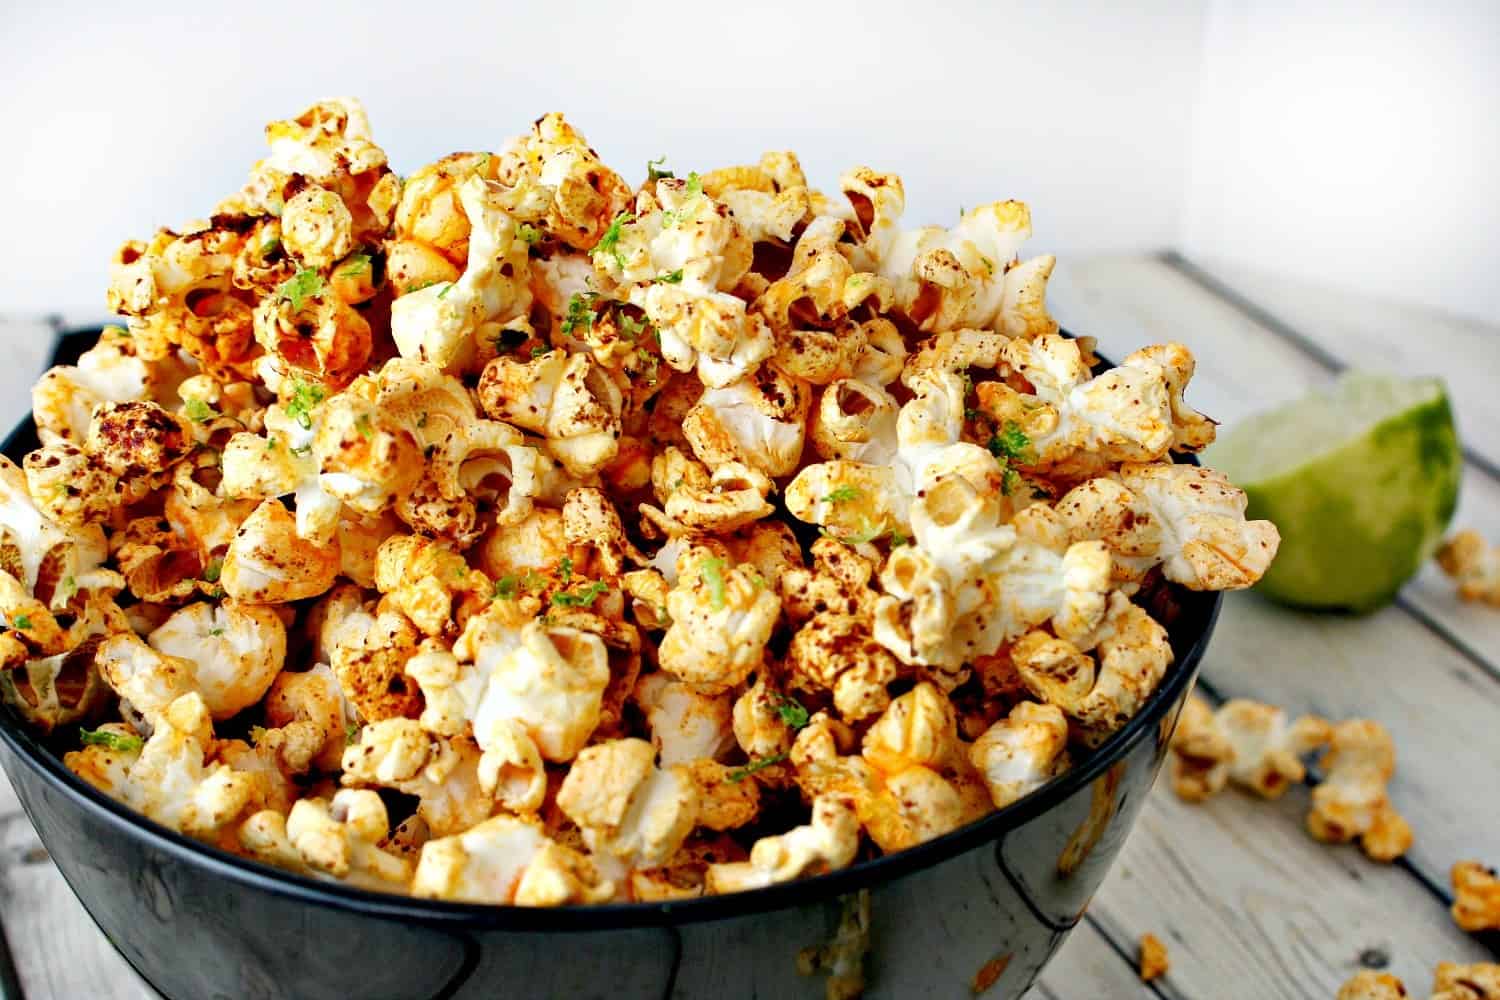 Chili and lime popcorn